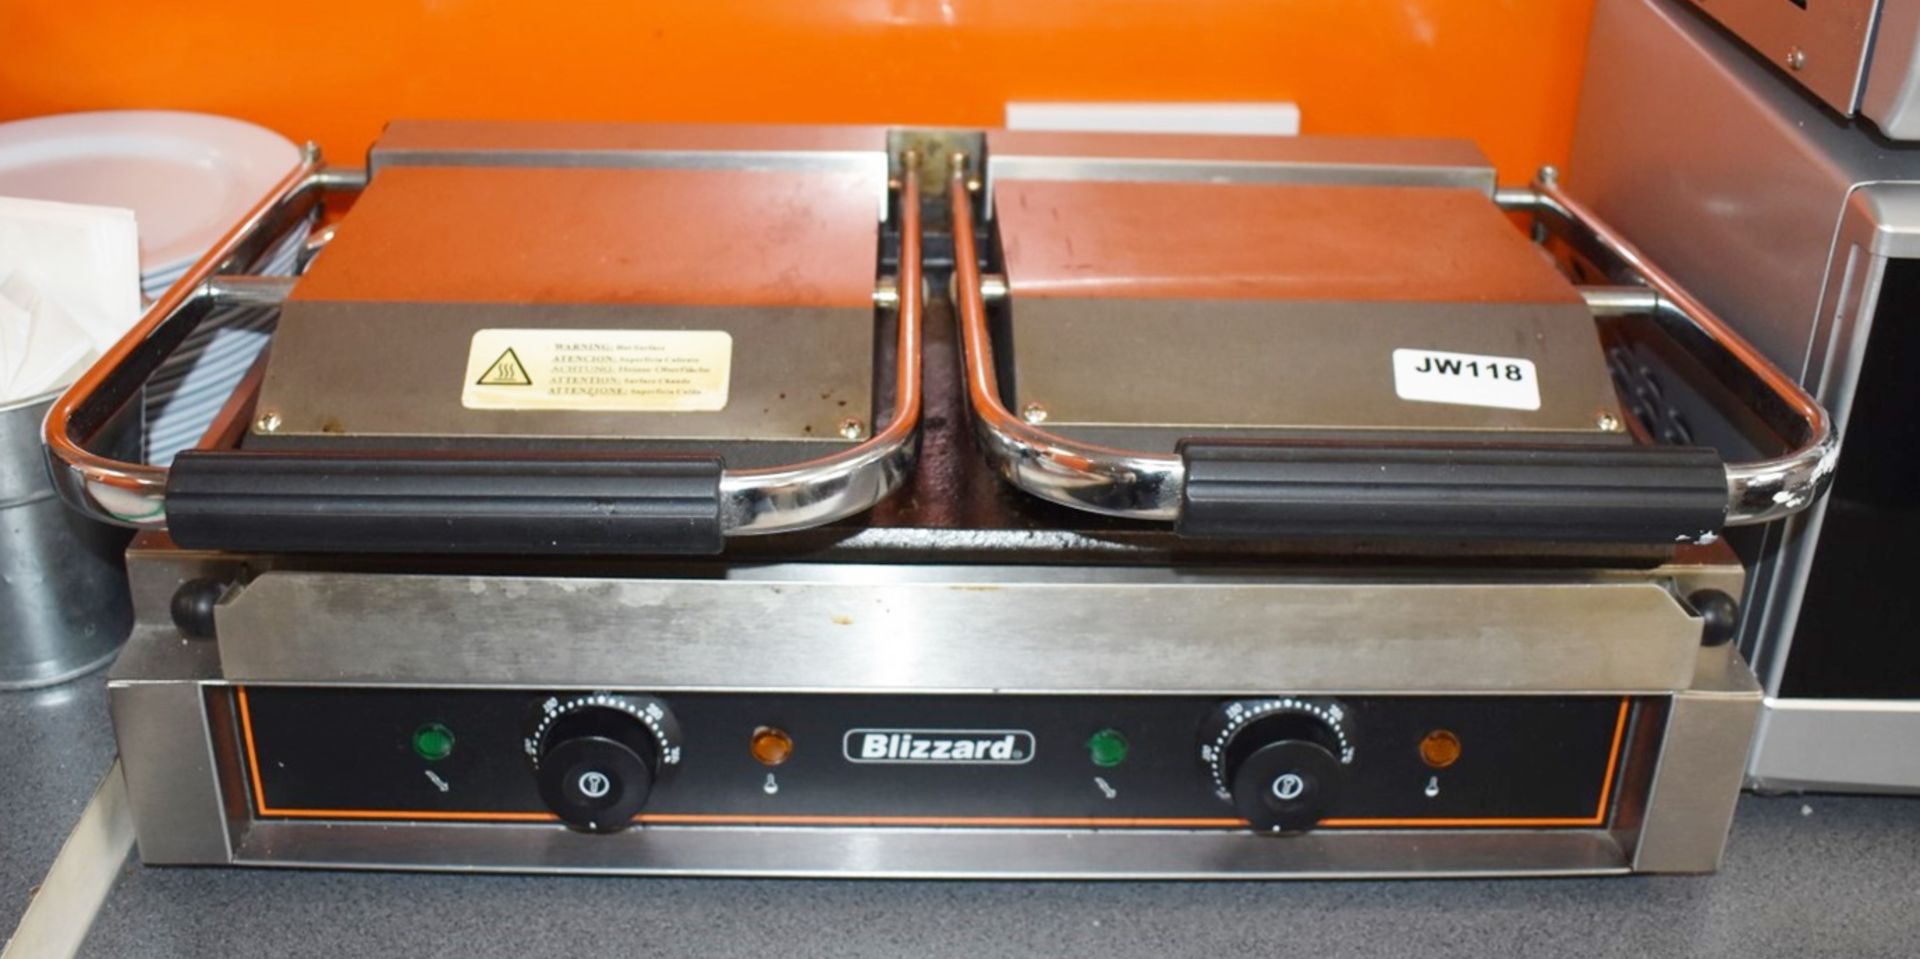 1 x Blizzard BRSCG2 Commercial Double Contact Grill - 240v - H21 x W57 x D40 cms - - Image 3 of 8